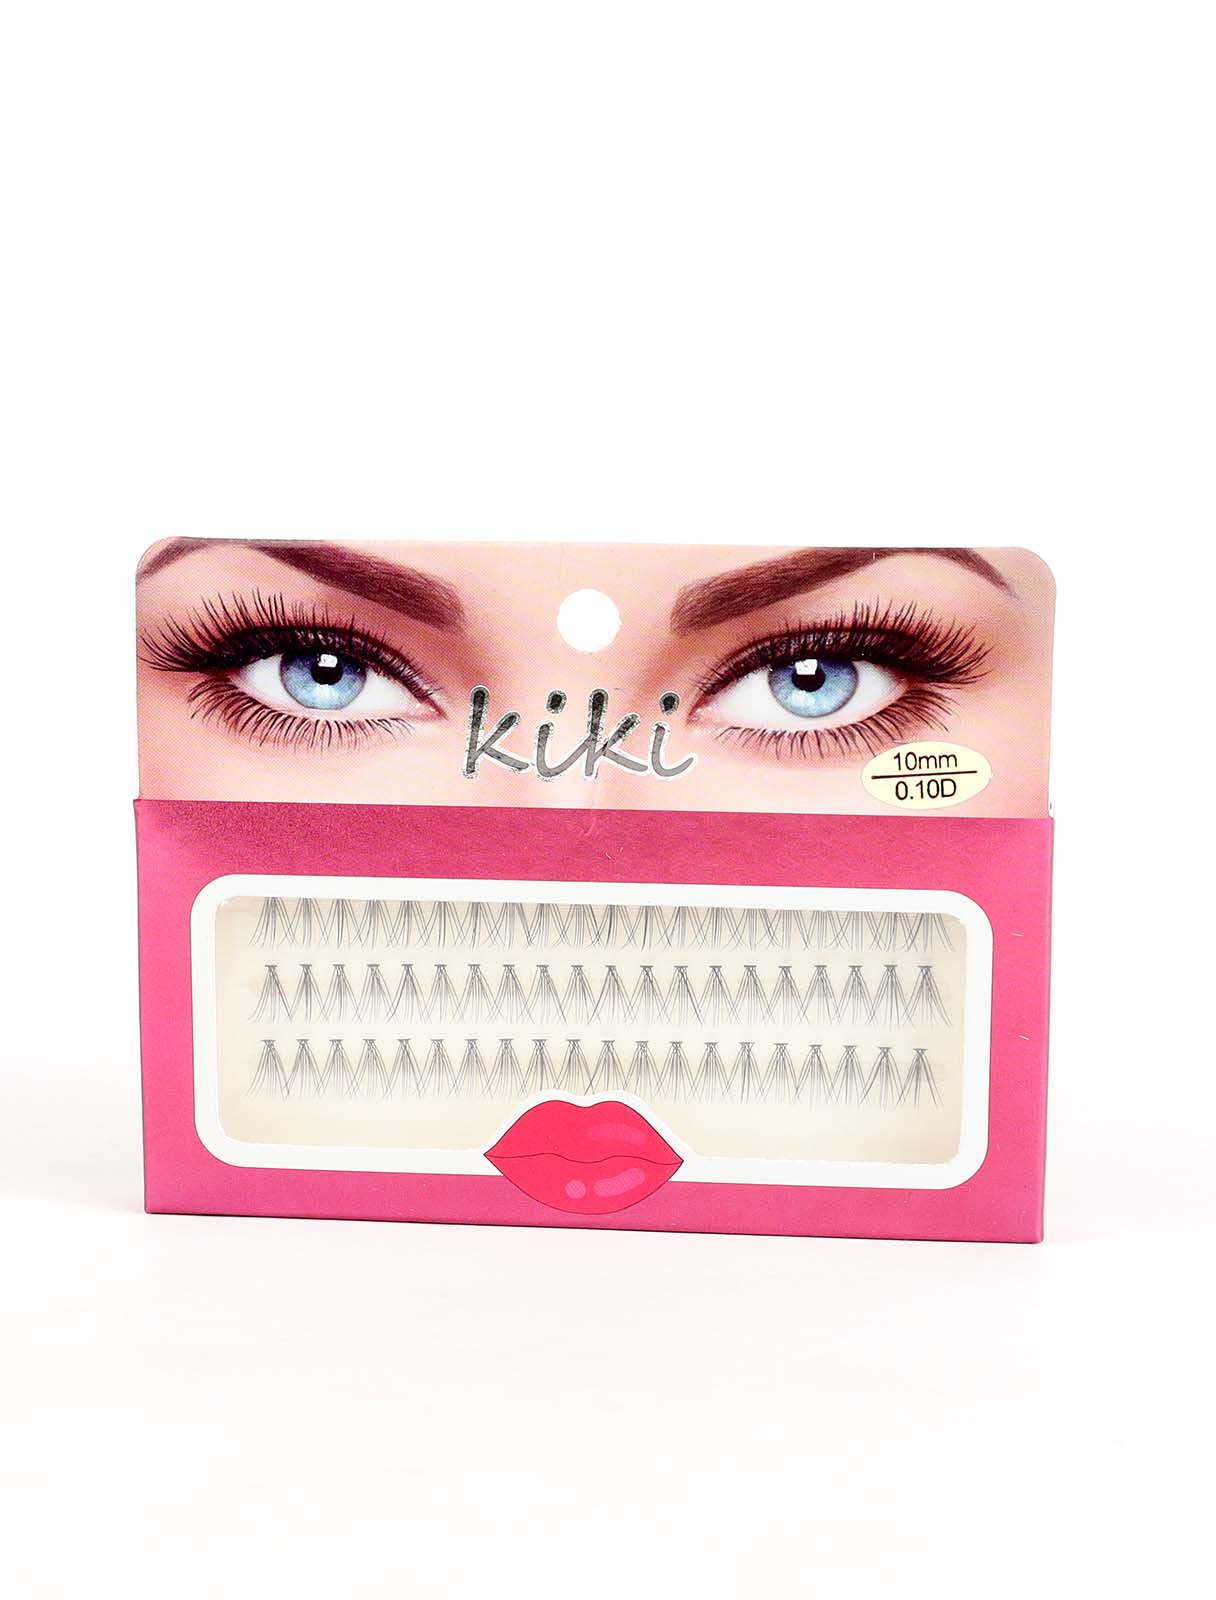 A set of natural hair eyelashes for the ends of the eye